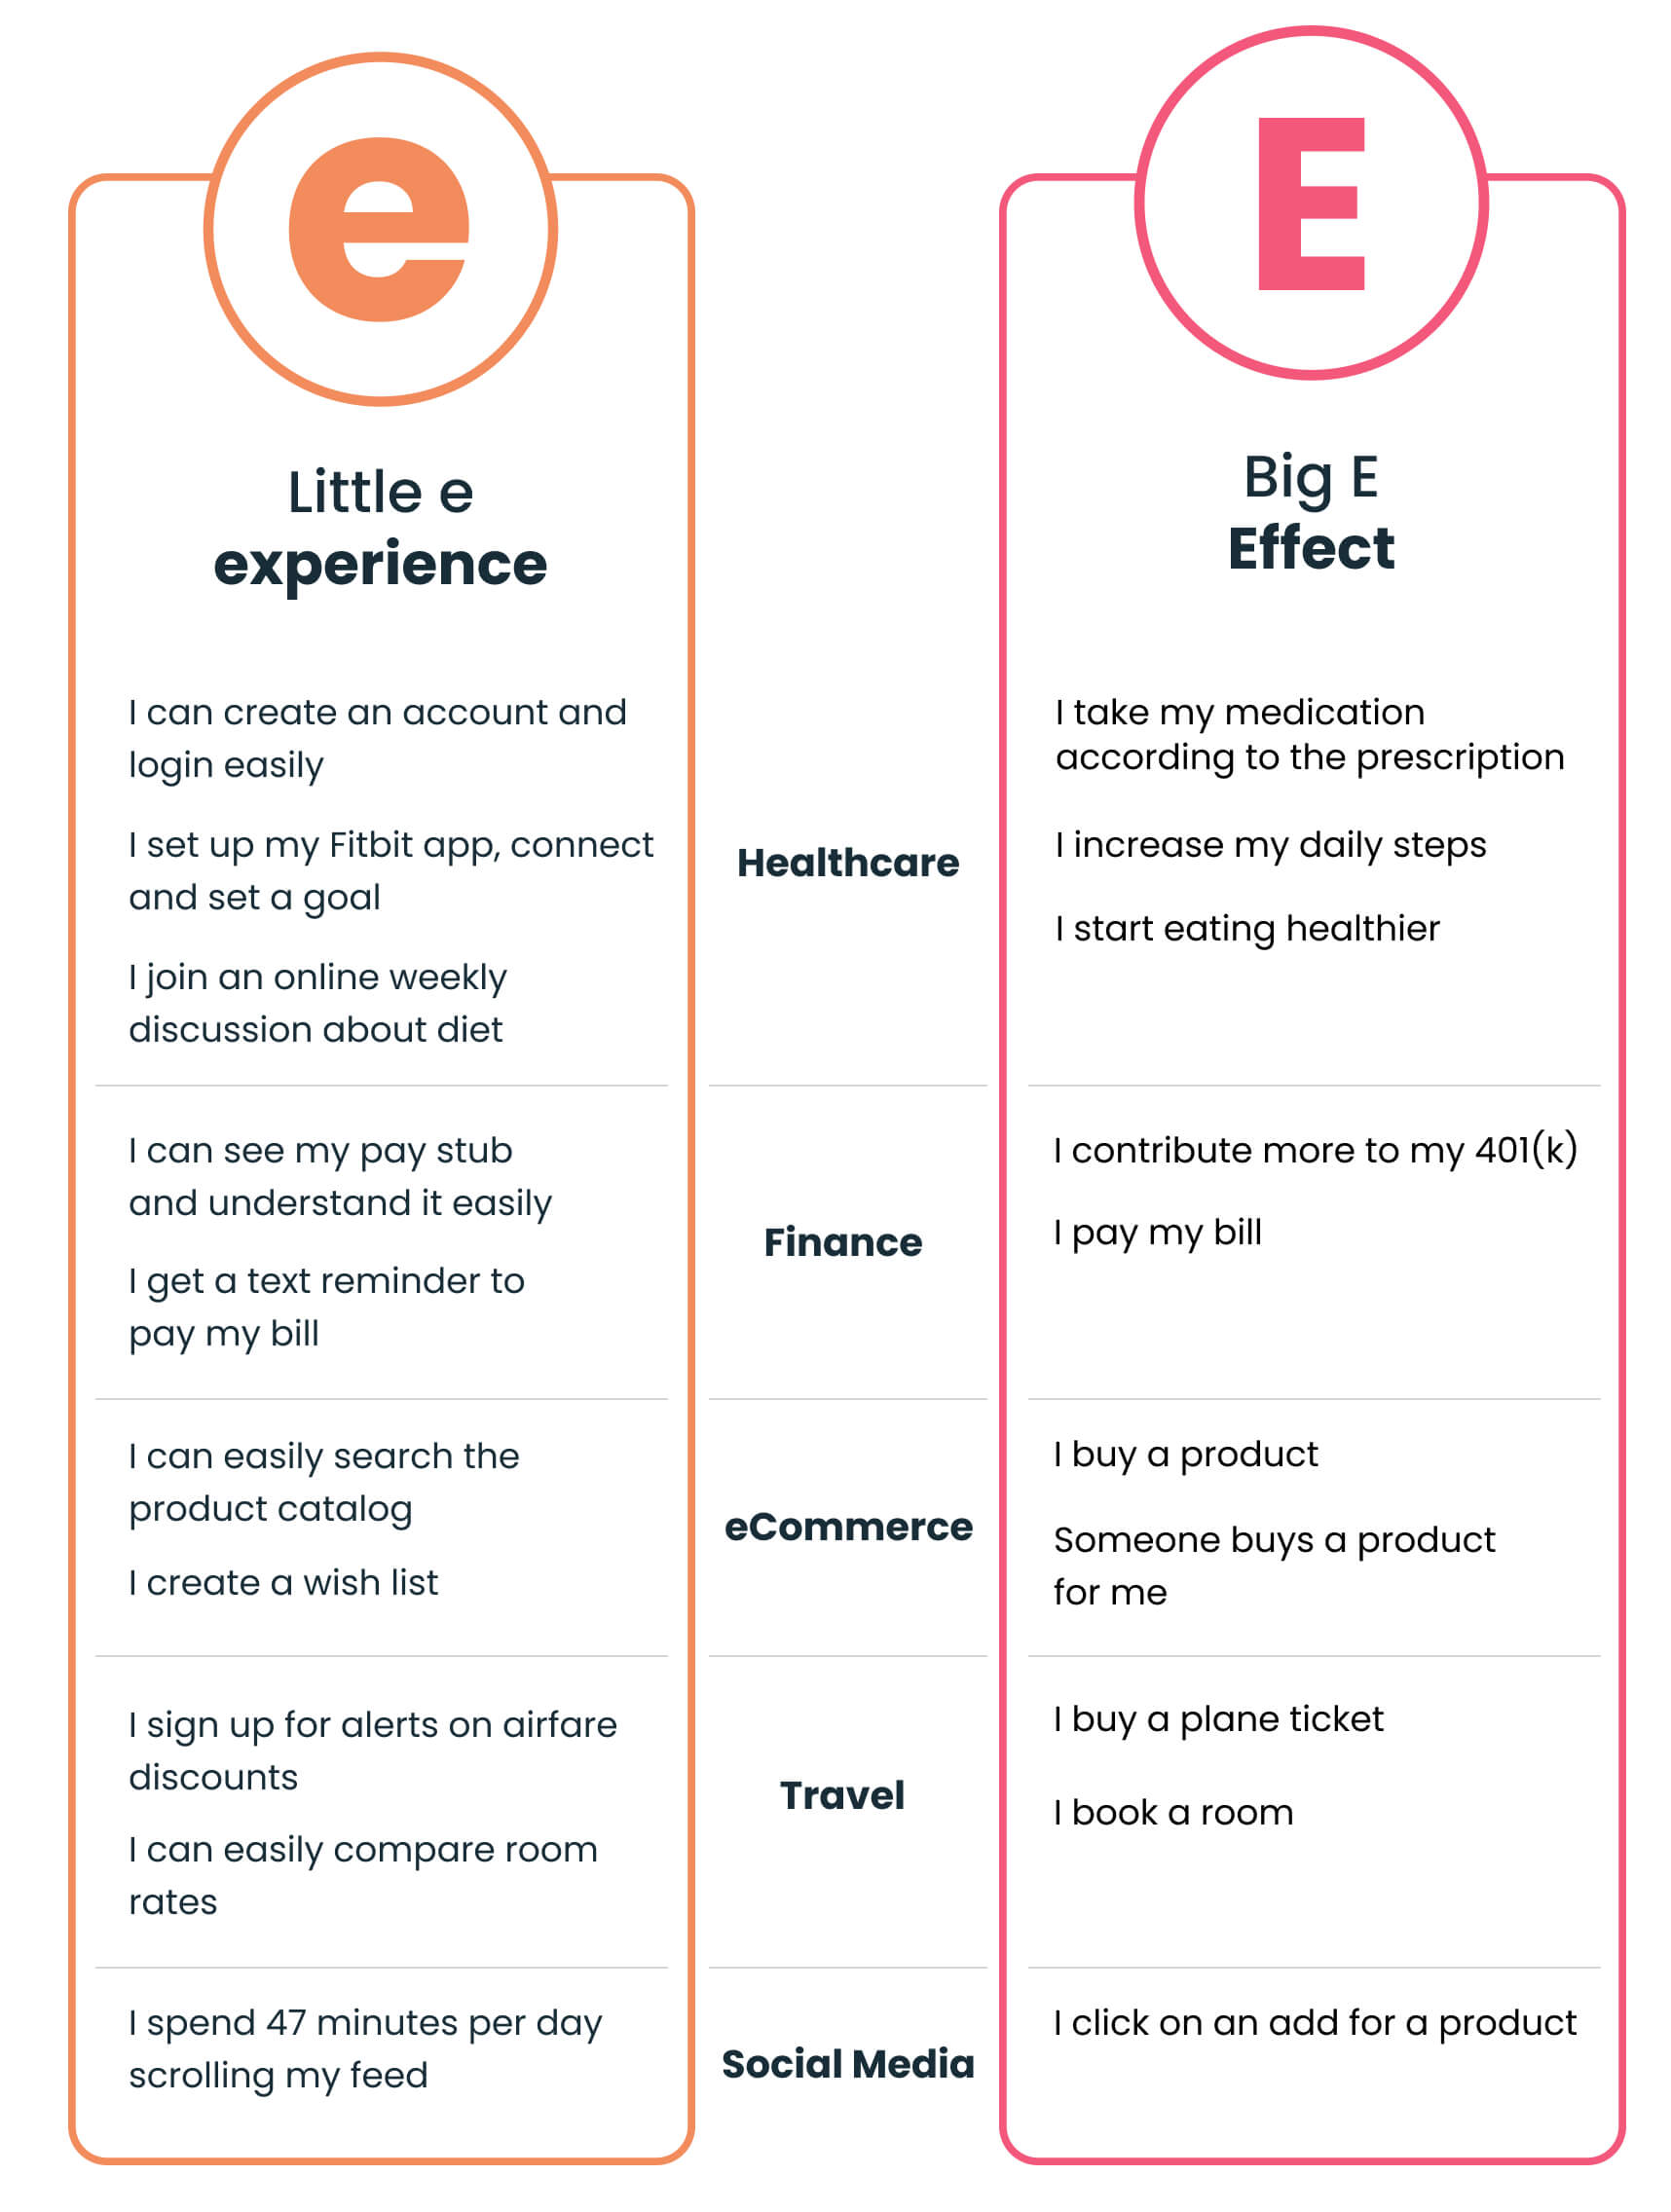 Side by side comparison of how "little e" for experience compares to "Big E" for Effect across various use cases